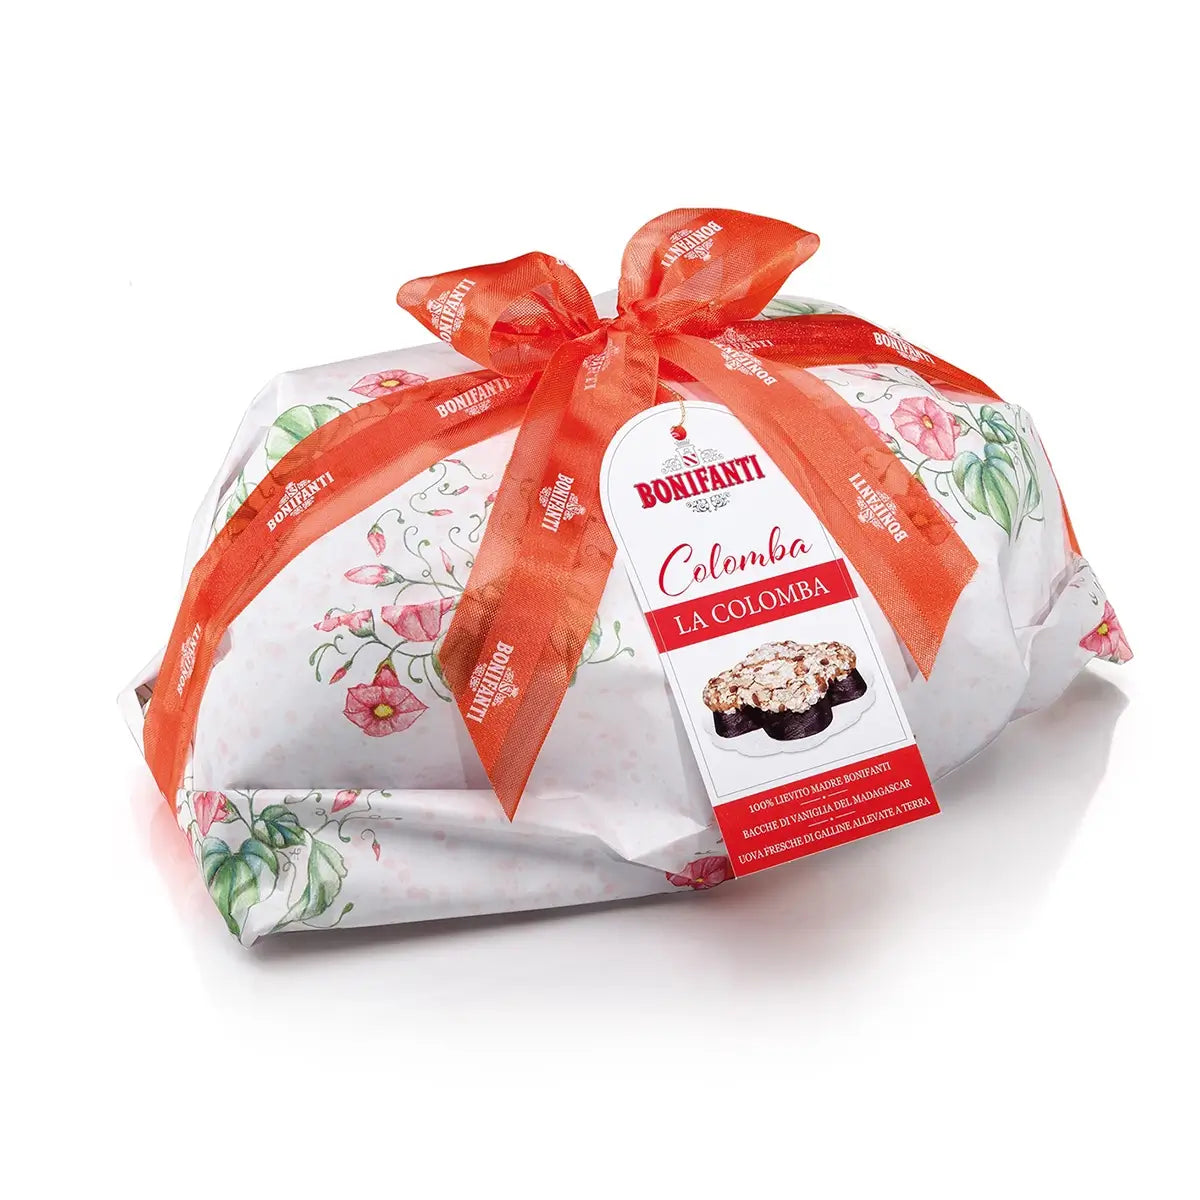 Colomba Classica Bonifanti (750g) - Traditional Italian Easter Cake - Chefs For Foodies